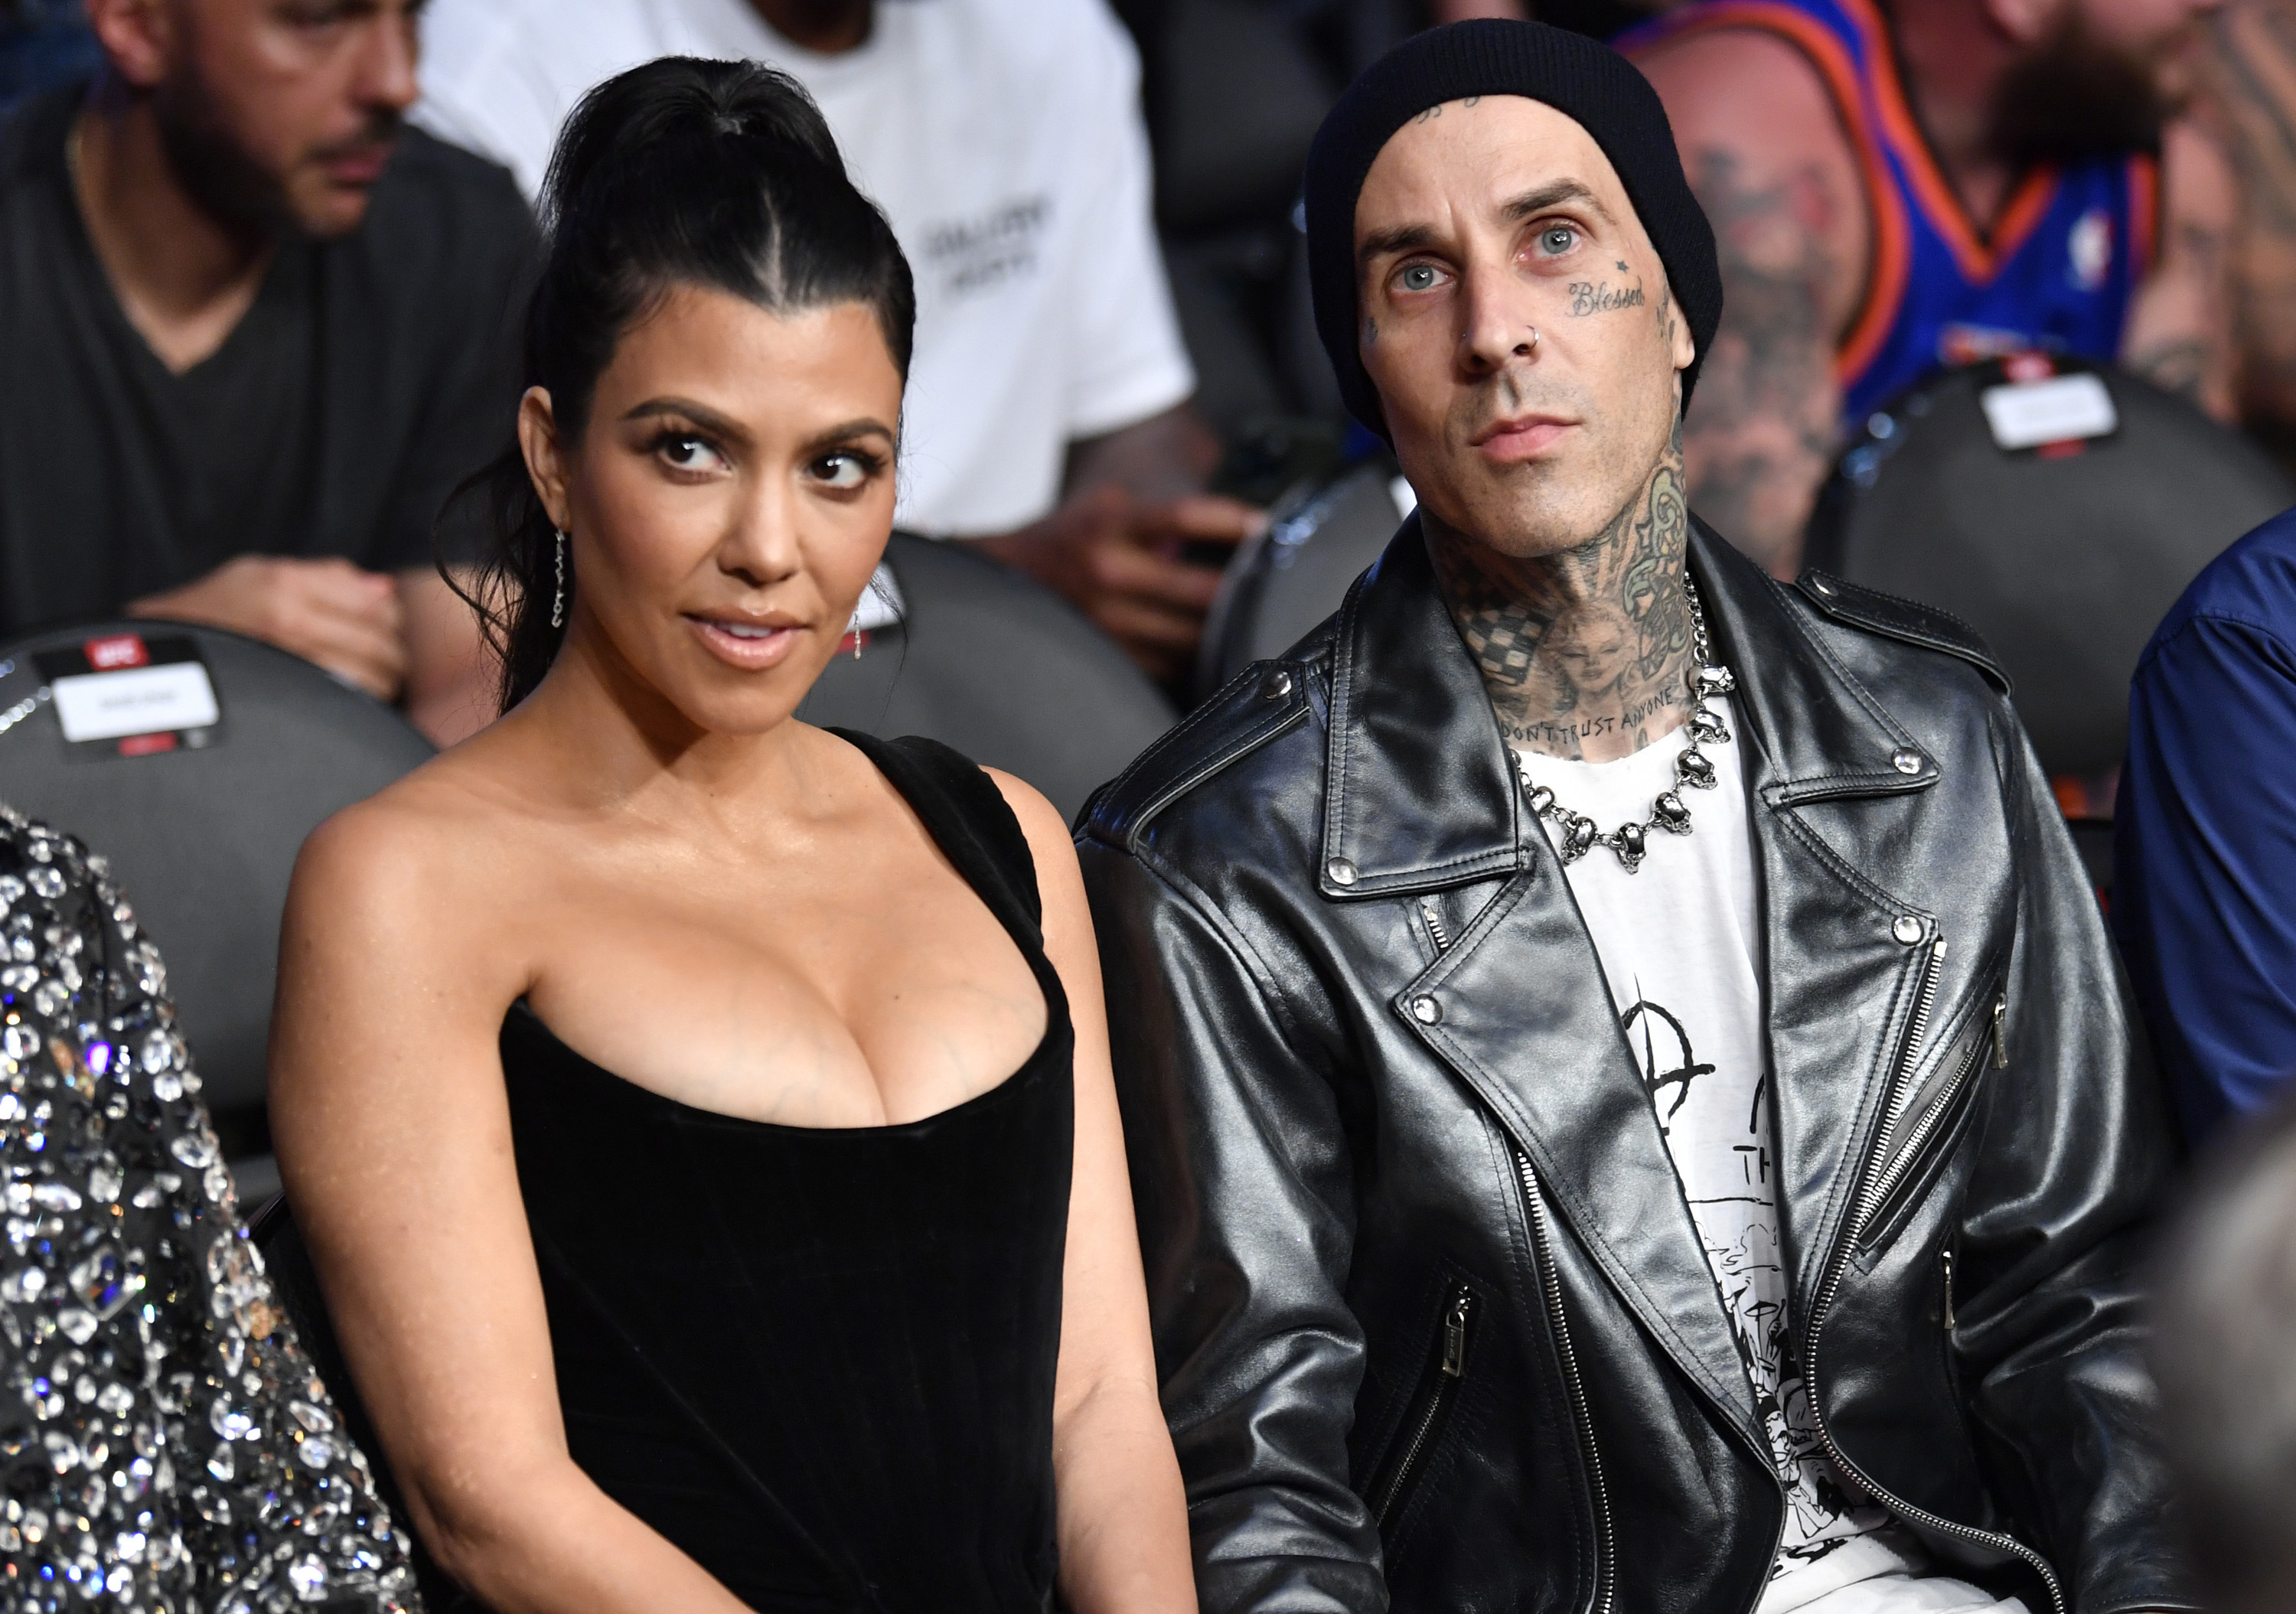 Kourtney in a one-strapped dress sits next to fiance Travis Barker wearing a leather jacket and beanie